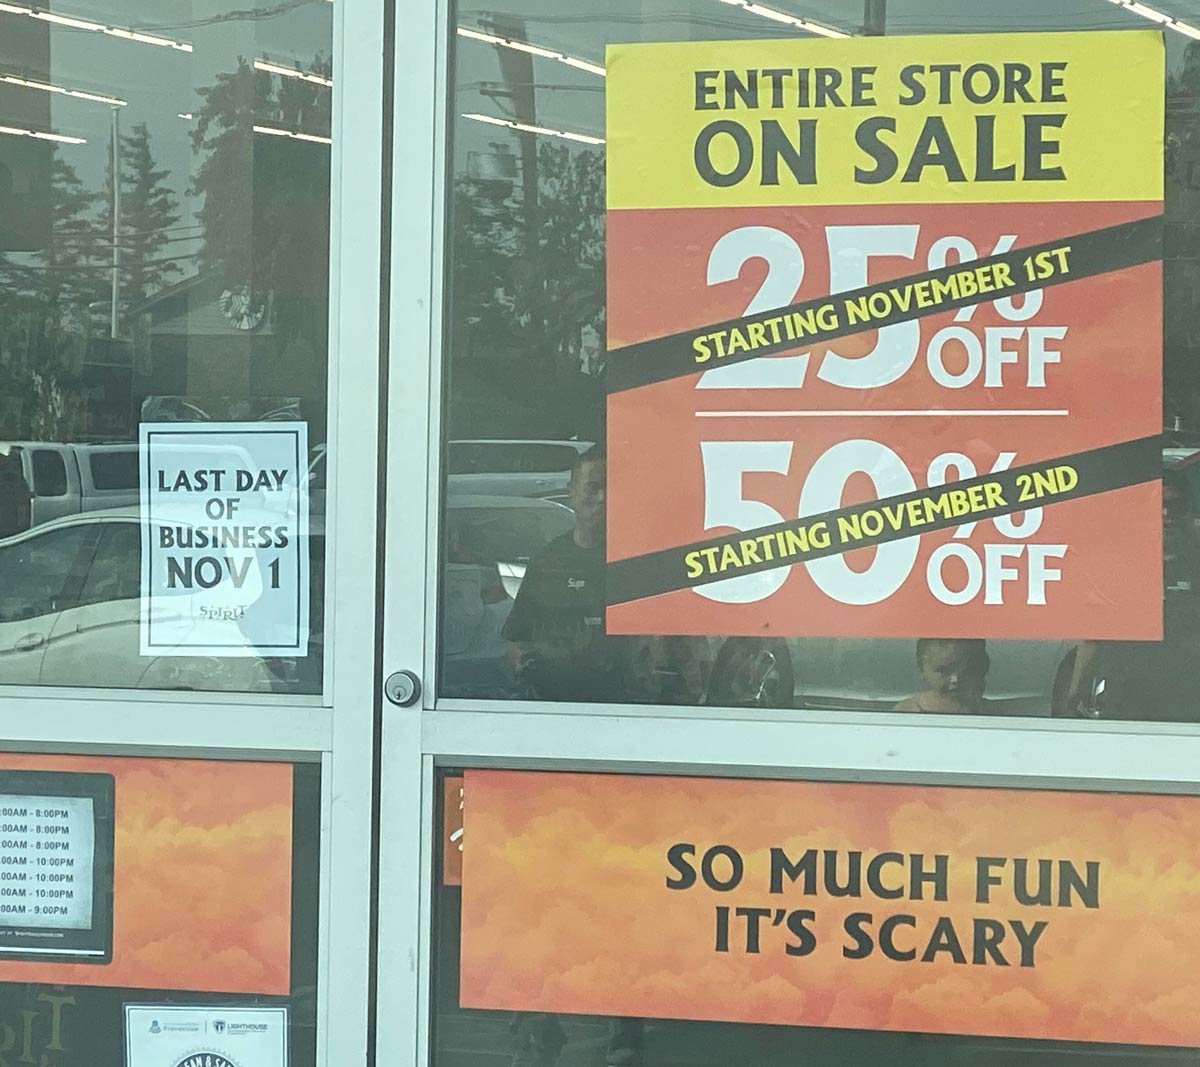 They Close Before 50% Off